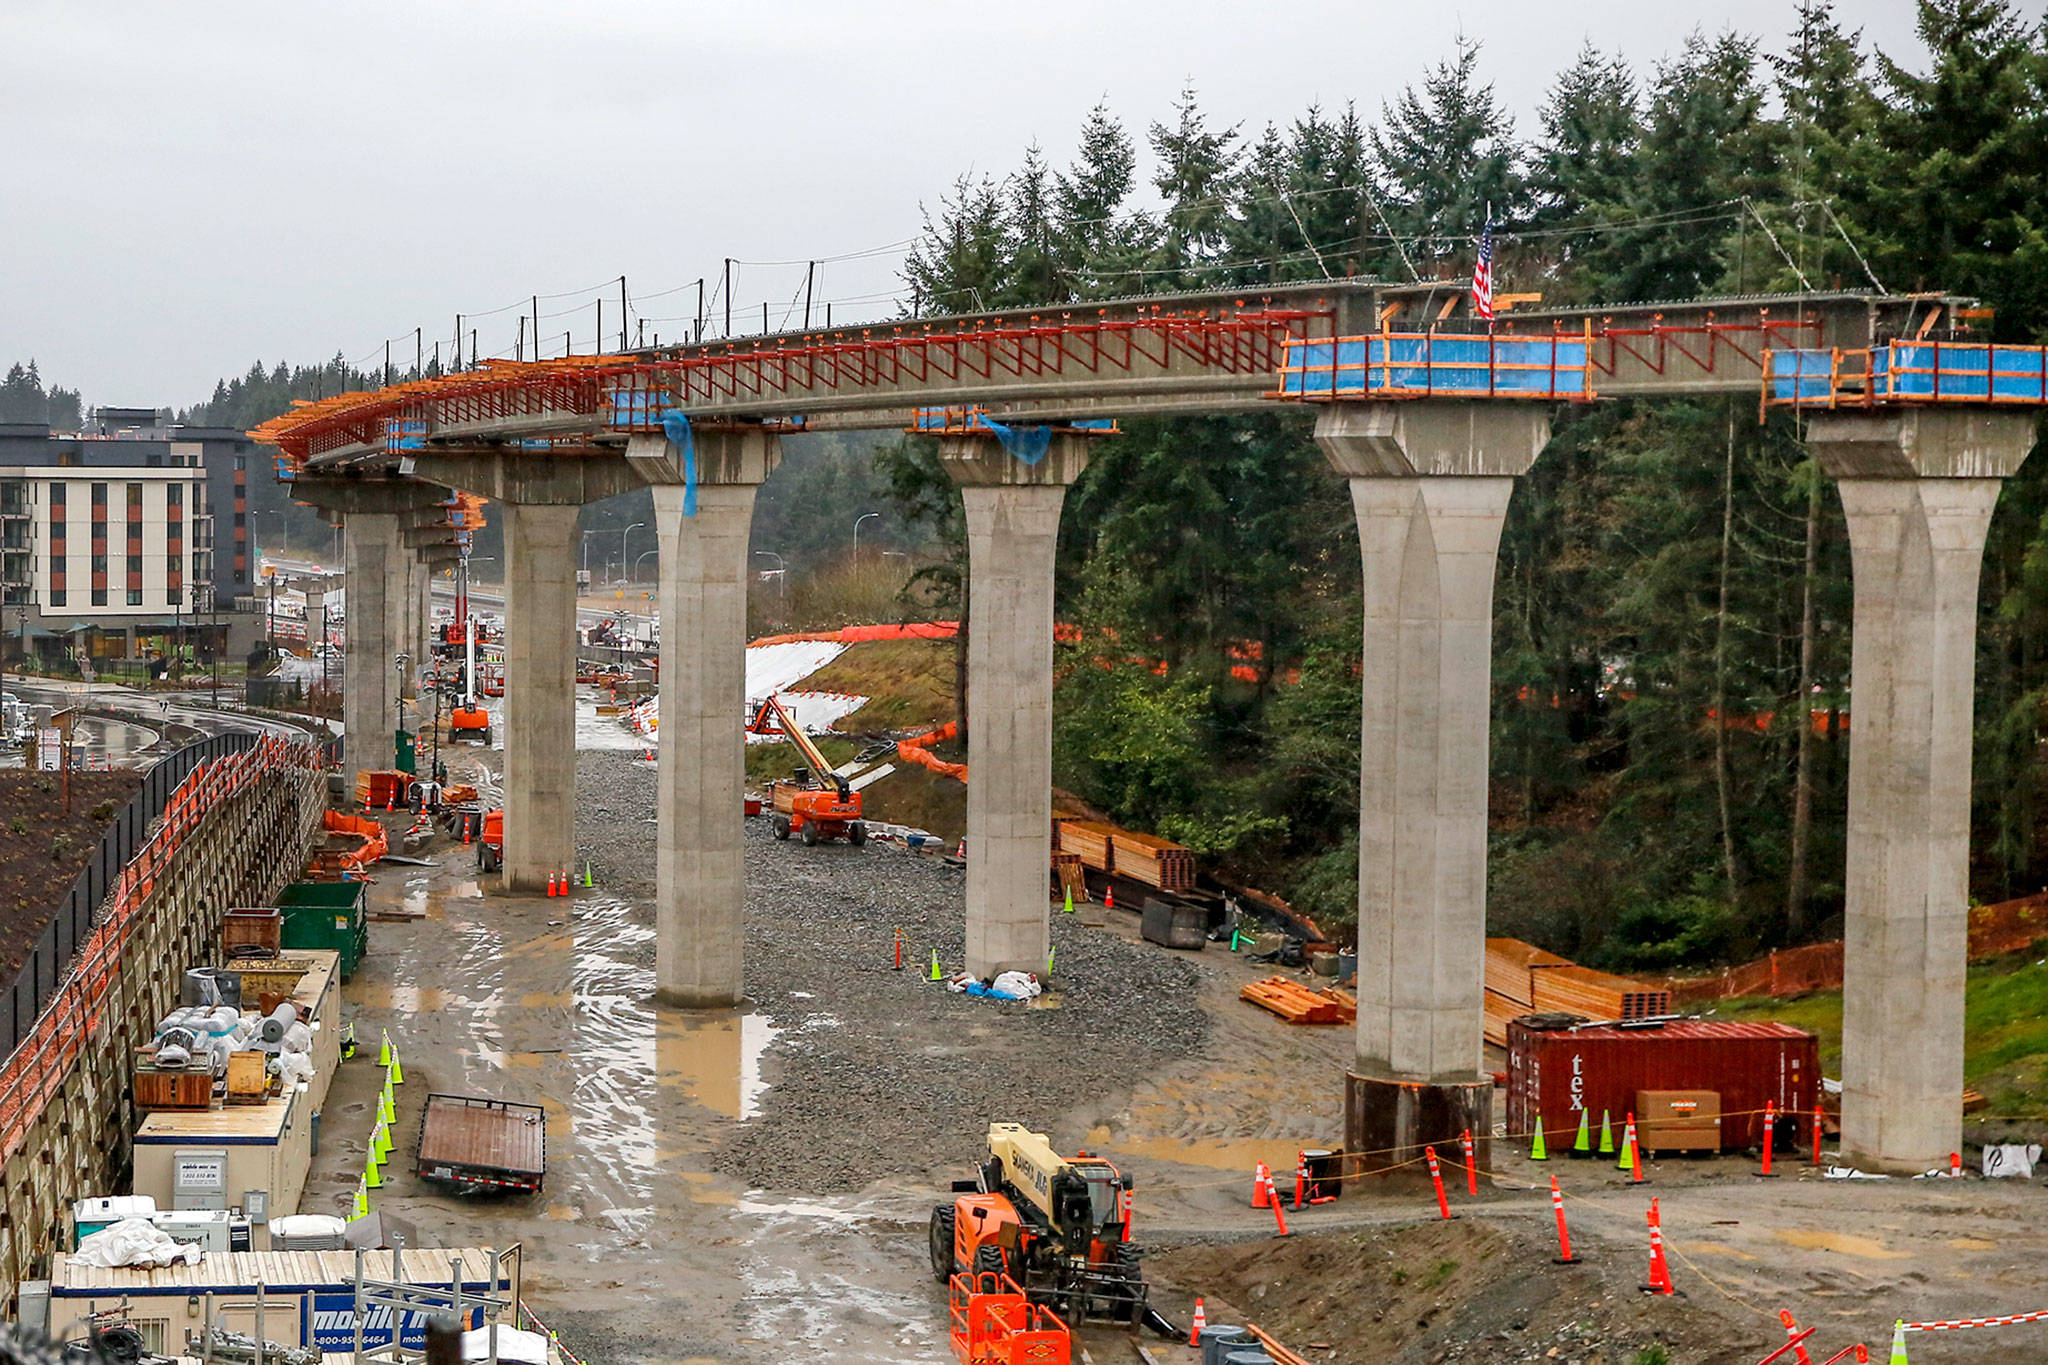 The Lynnwood Link light rail extension is on track to open in 2024, but projected higher costs likely mean changes for ST3 projects such as the Everett Link extension originally scheduled for 2036. (Kevin Clark / Herald file)